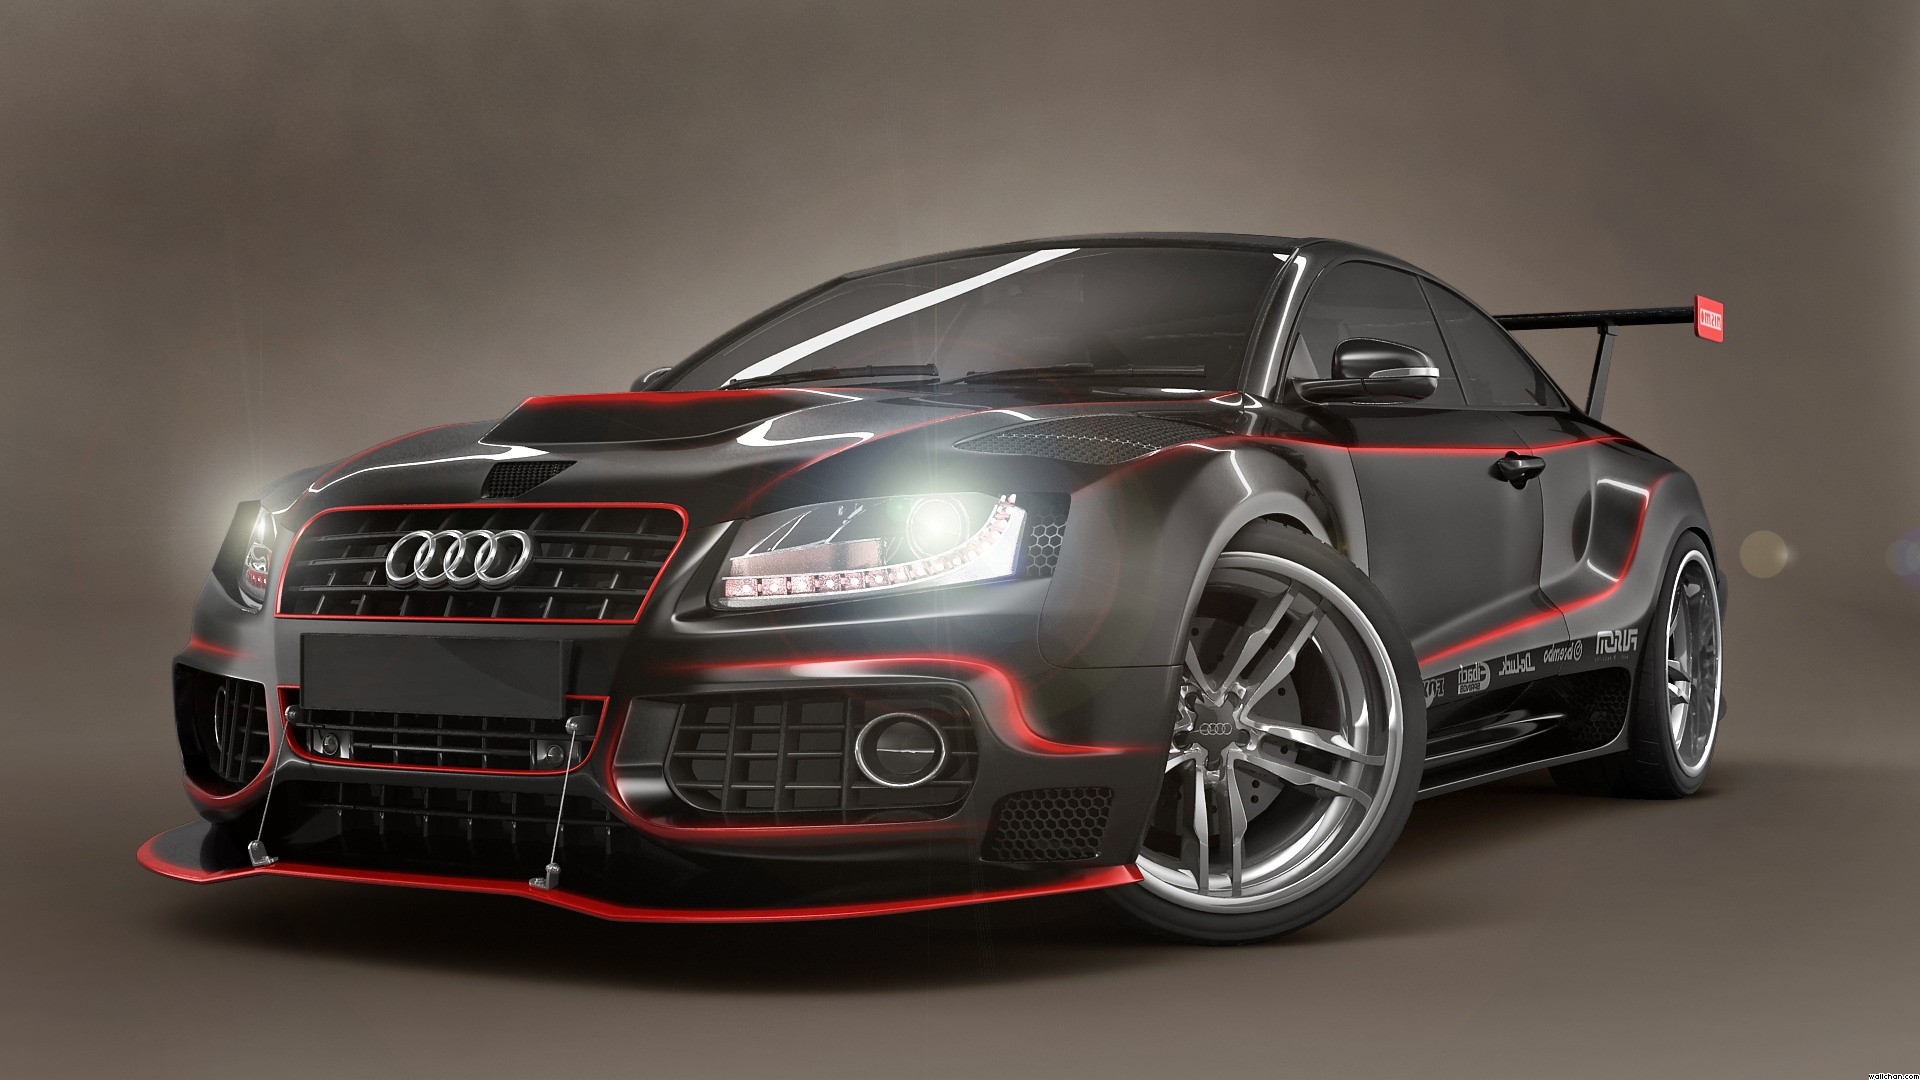 Cool HD Audi Wallpapers For Download 1920x1080